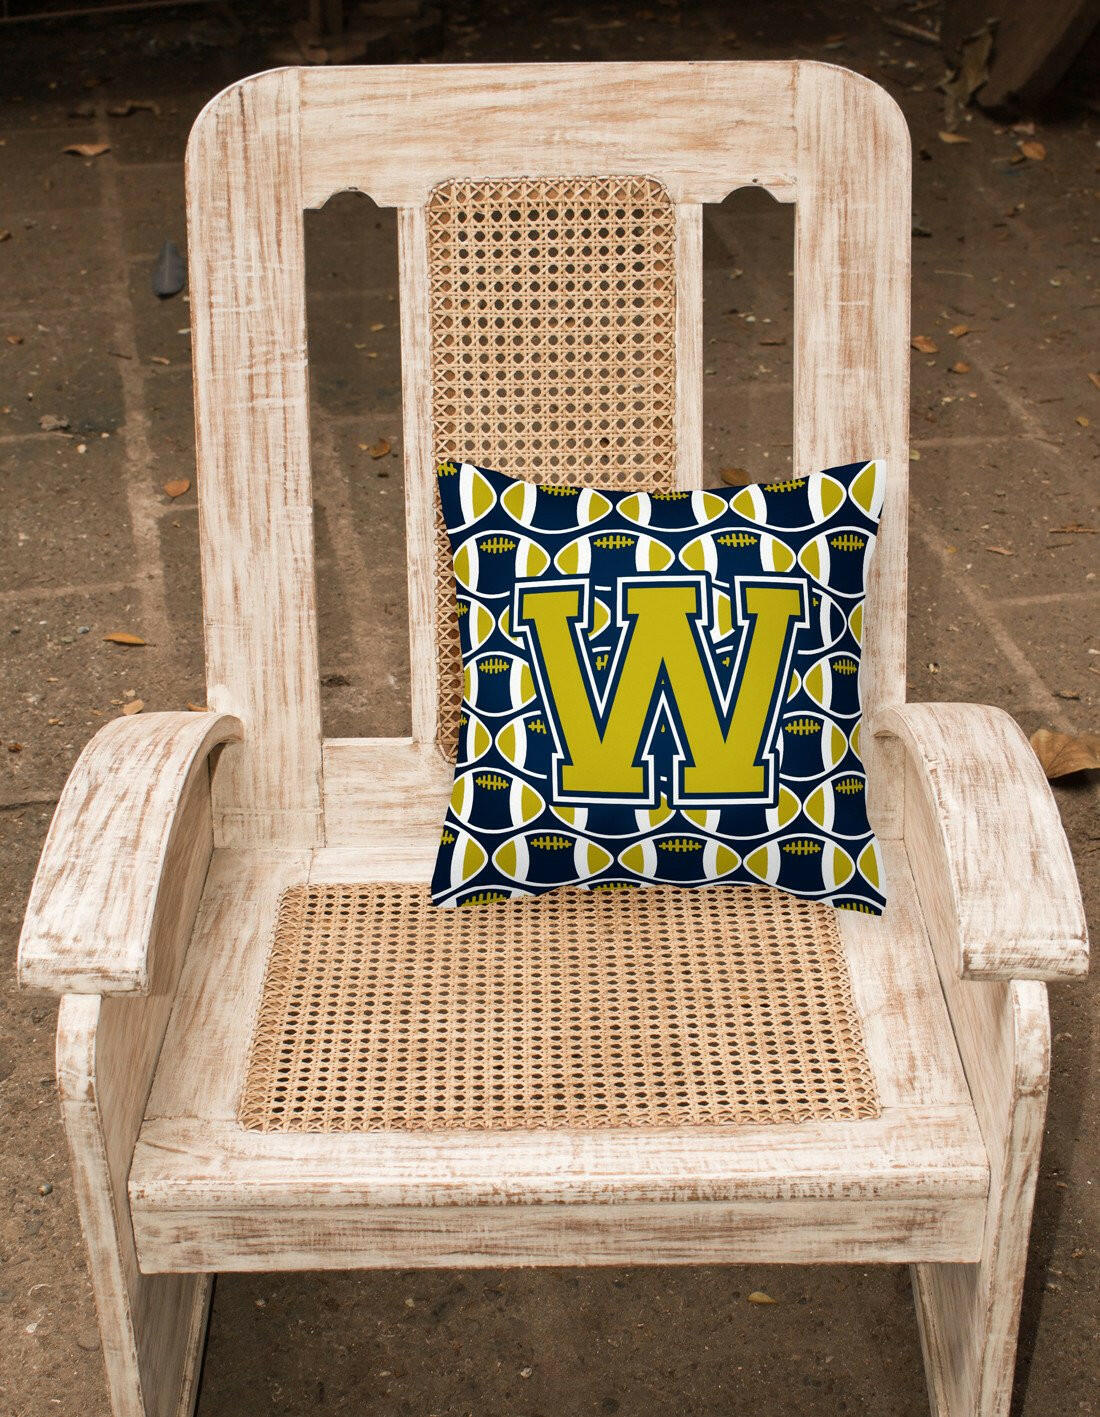 Letter W Football Blue and Gold Fabric Decorative Pillow CJ1074-WPW1414 by Caroline's Treasures